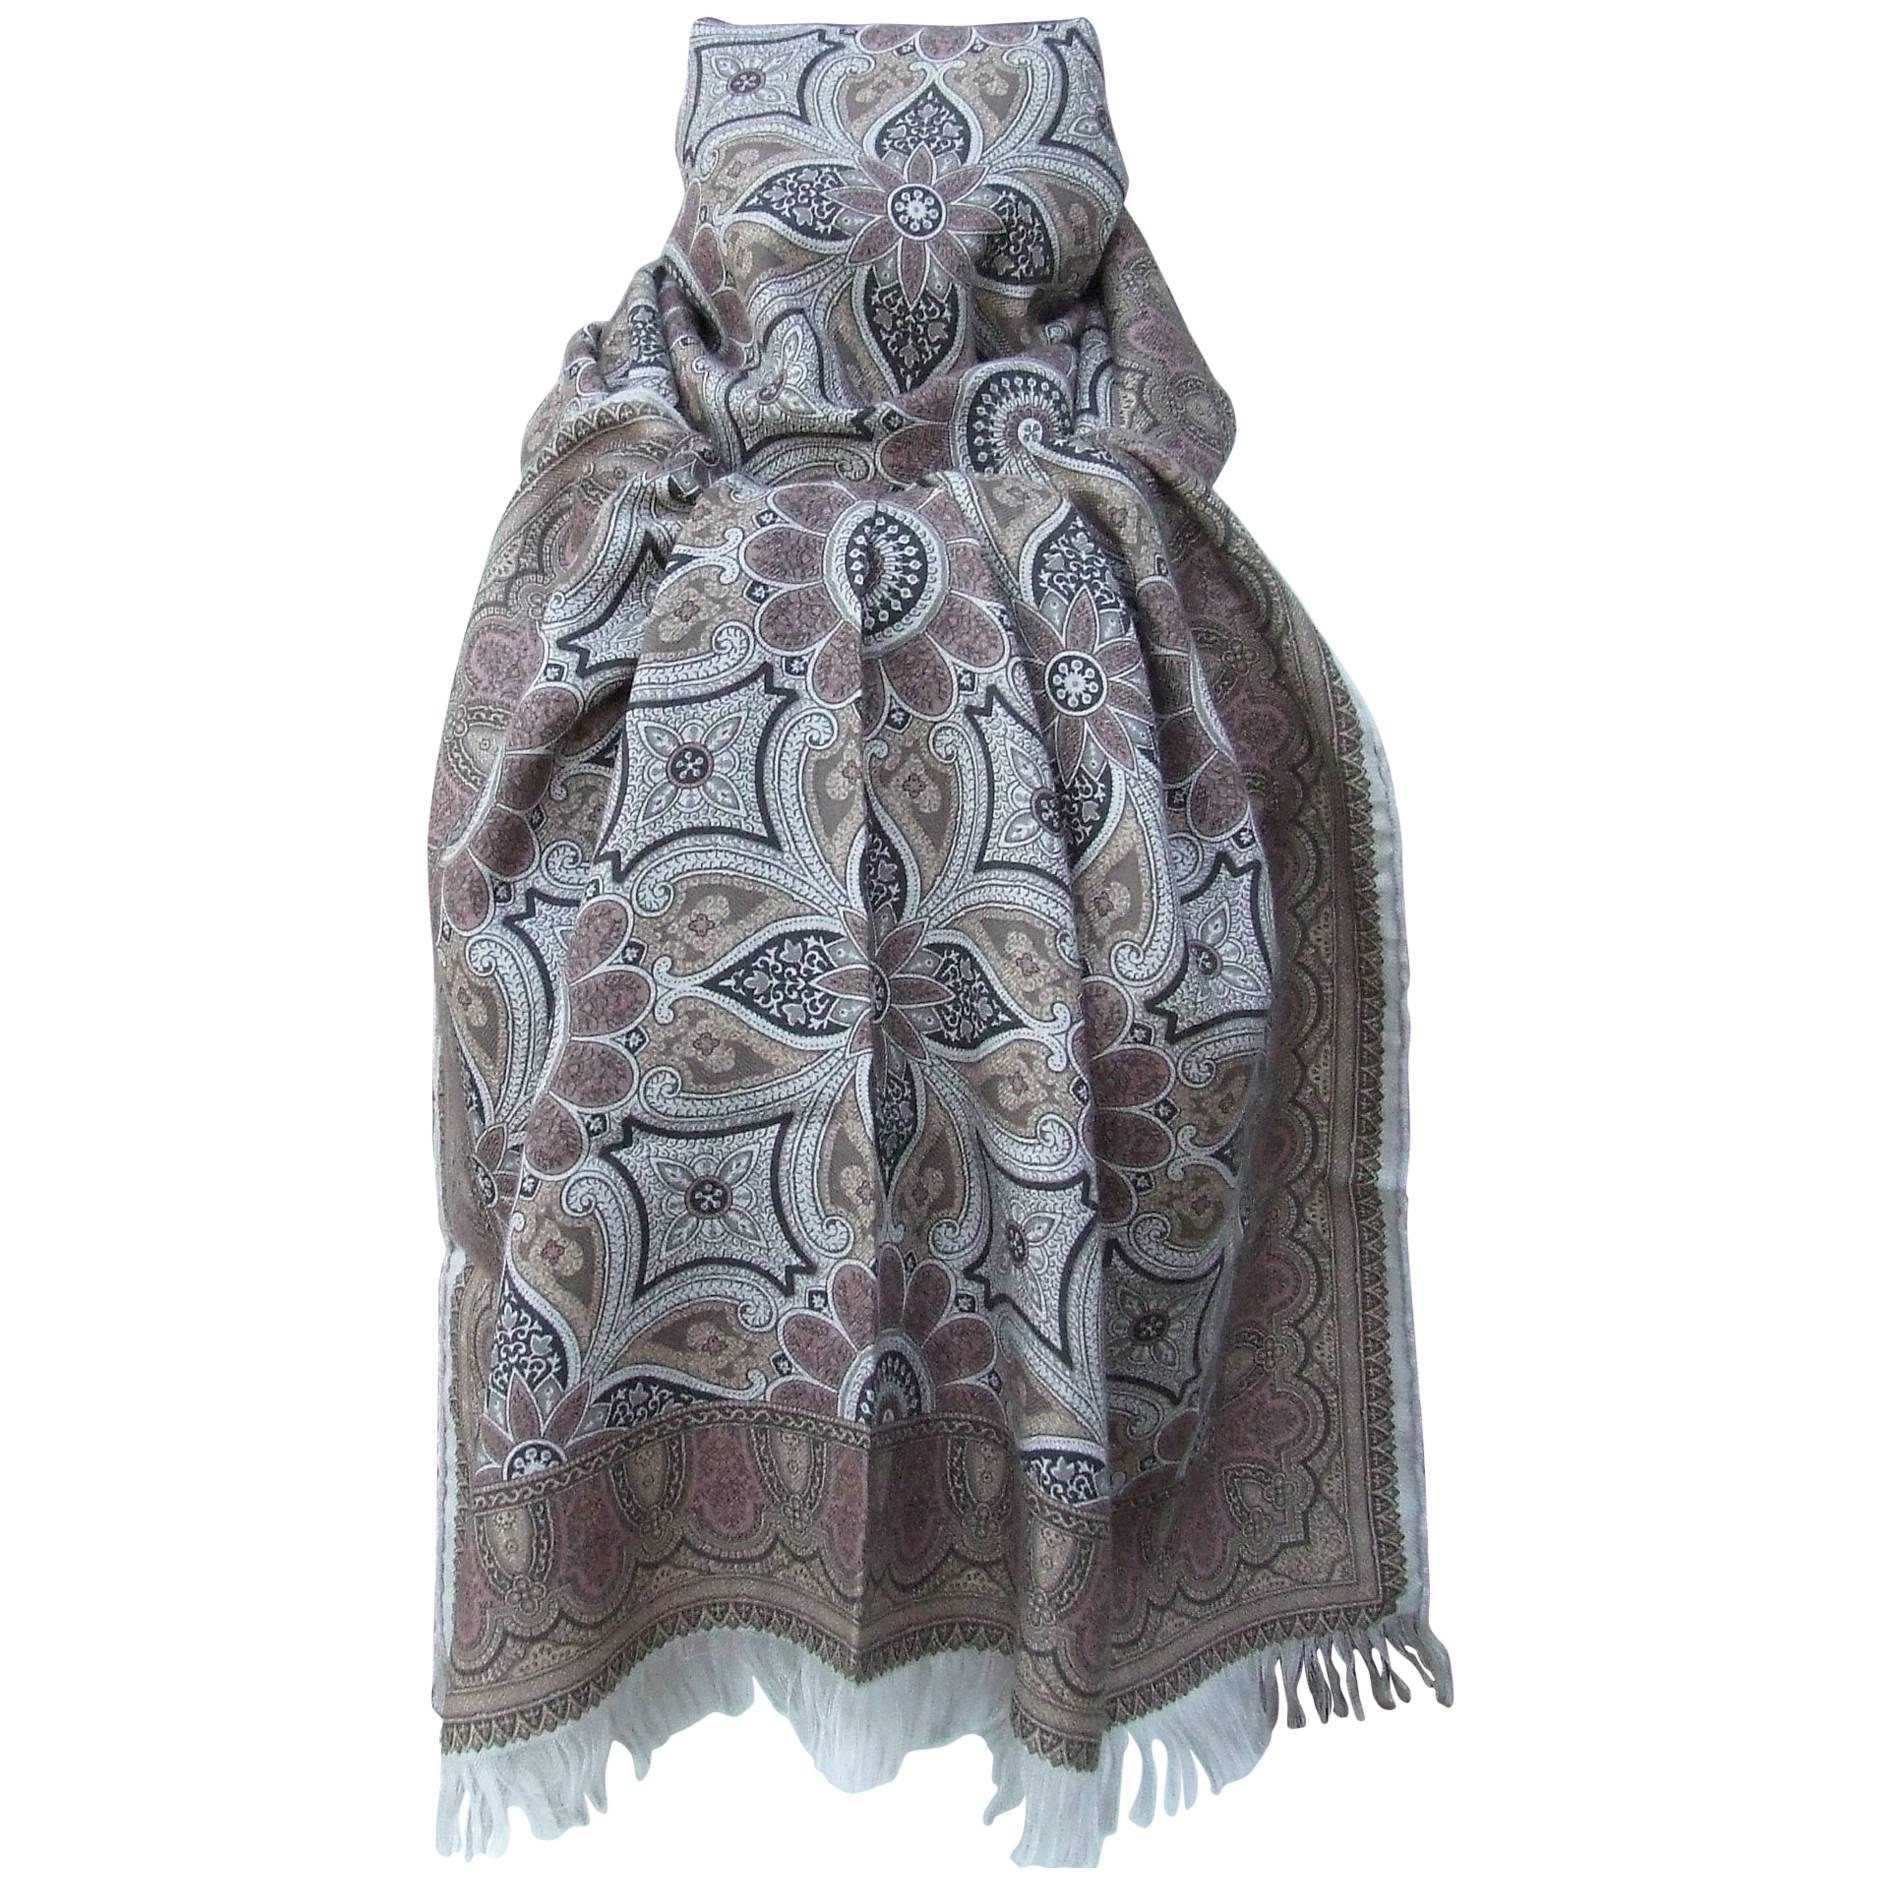 Hermès Long Scarf Stole Pashmina Cashmere and Silk Shades of Beige 181 cm